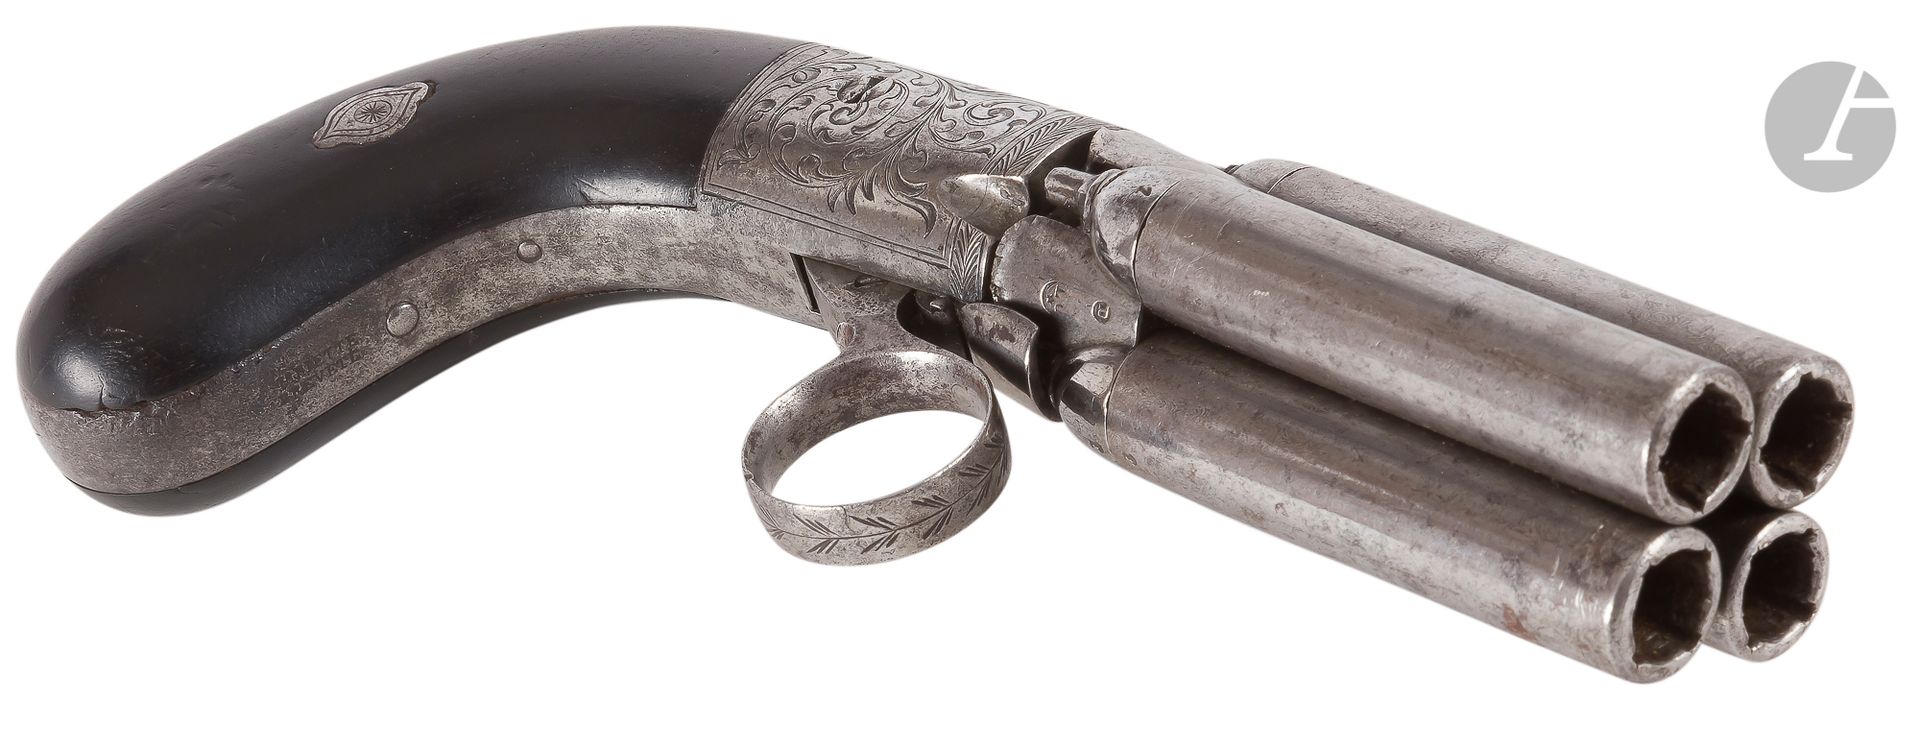 Null Mariette pepperbox revolver, four-shot percussion, 9 mm calibre 
. Engraved&hellip;